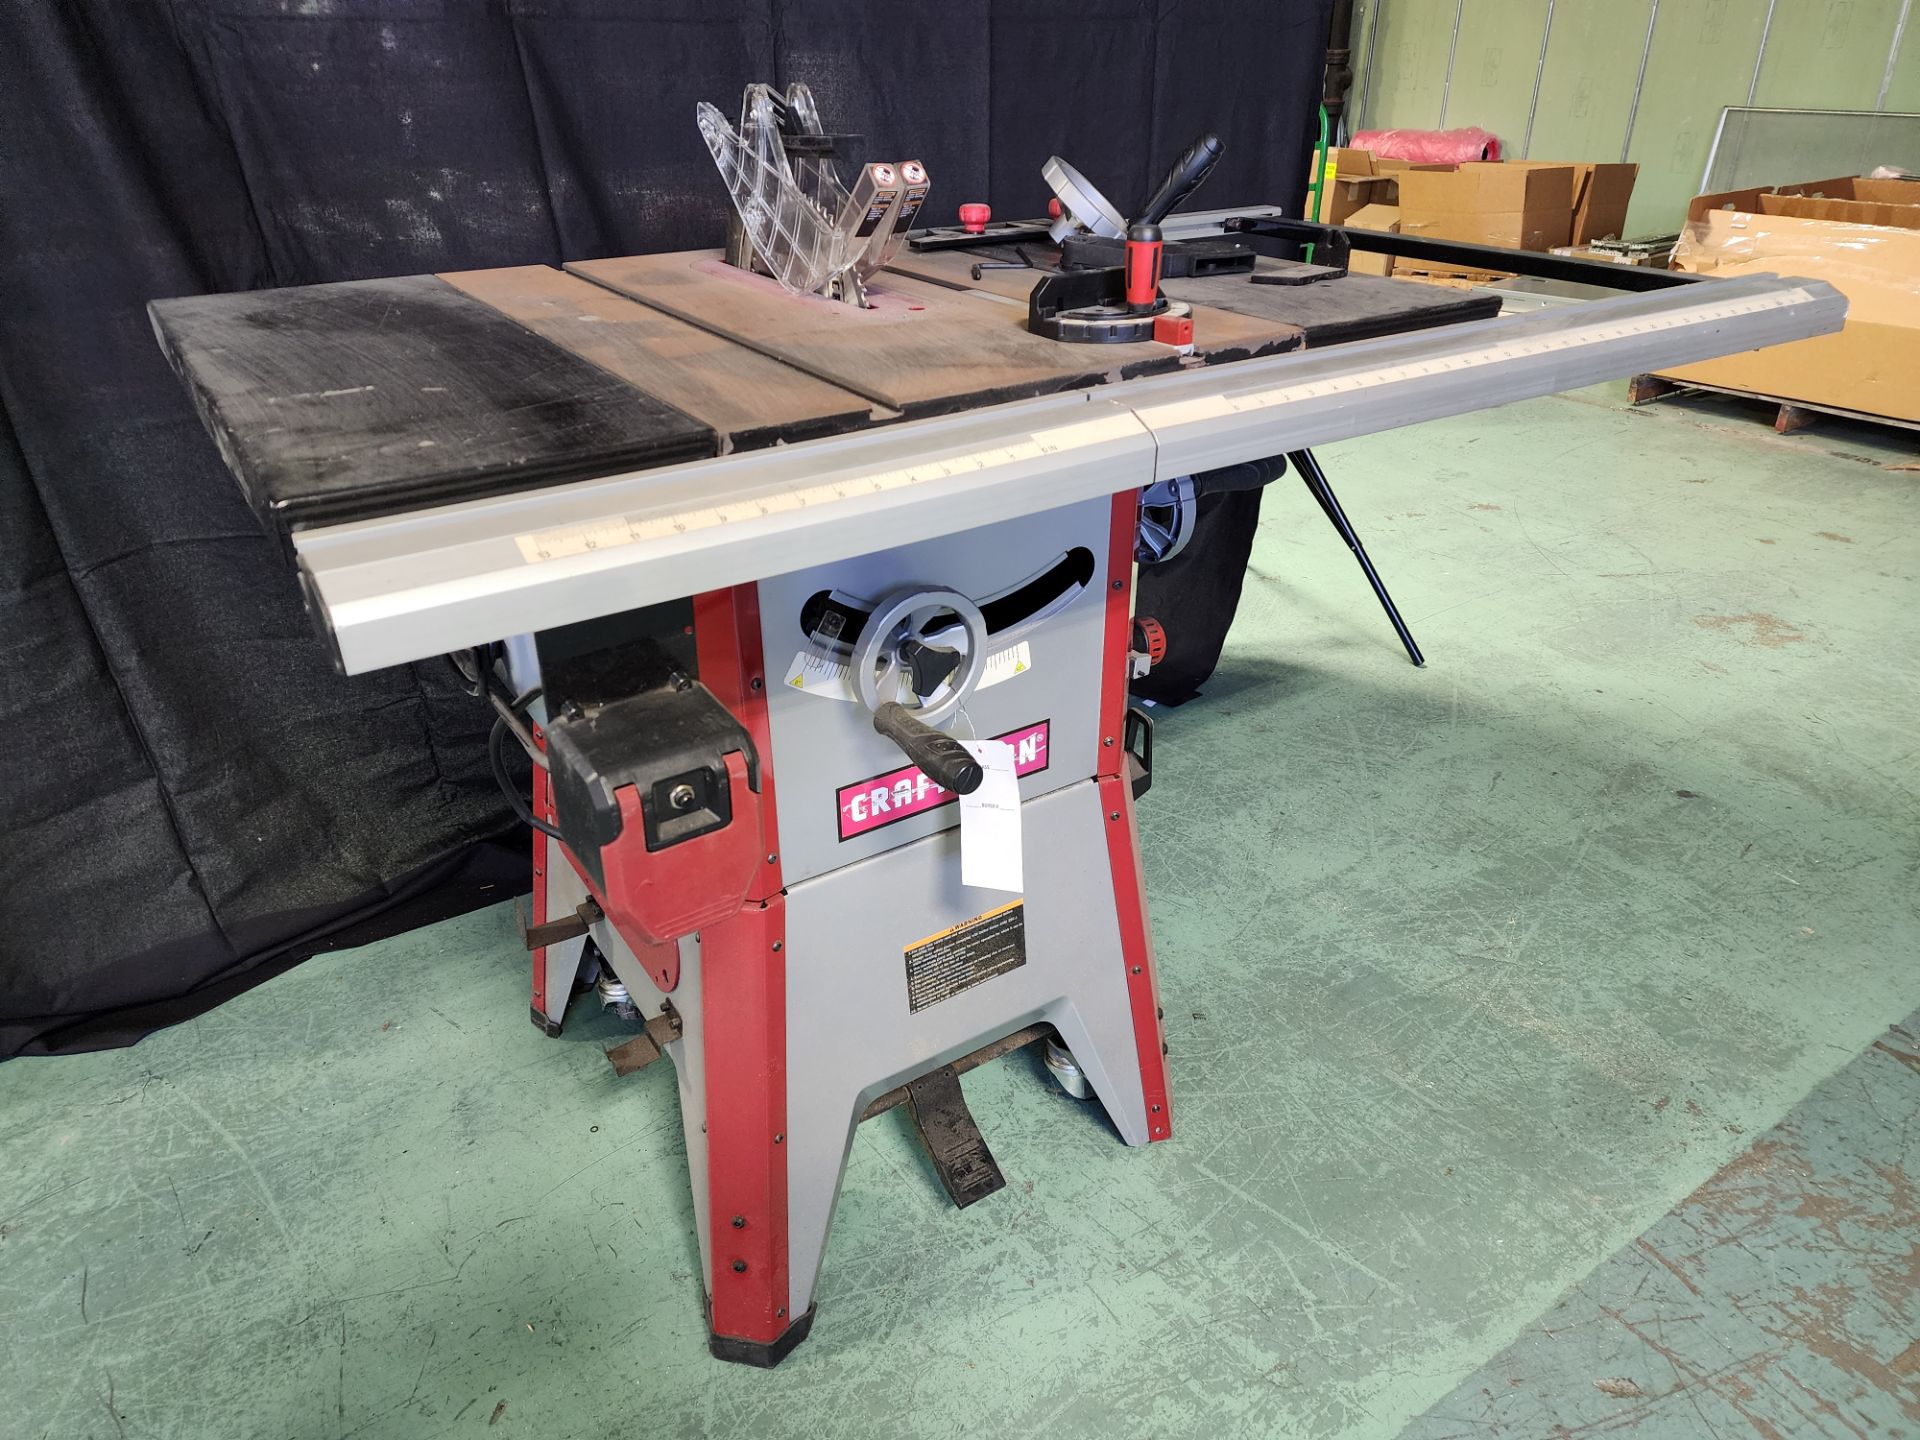 Craftsman Model 351.218331 10" Table Saw, S/N 201306 (2013) - Image 2 of 9